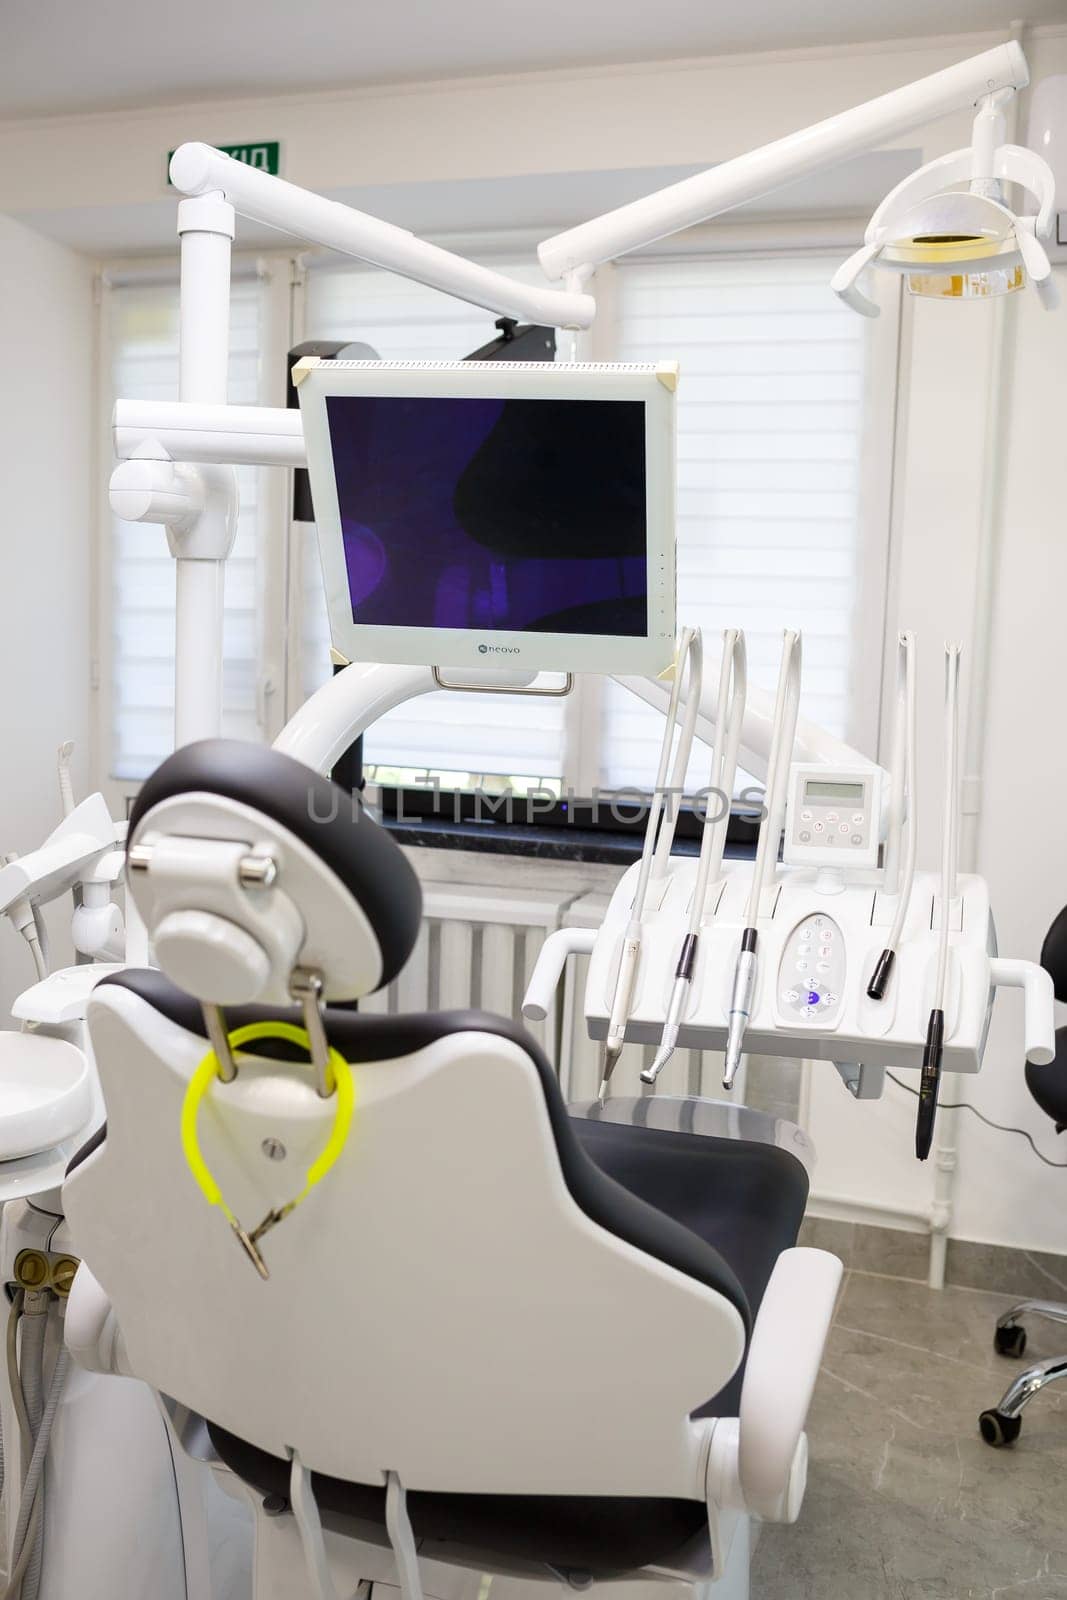 A modern dental office with new equipment and a dental chair. Cabinet for dental treatment by Dmitrytph